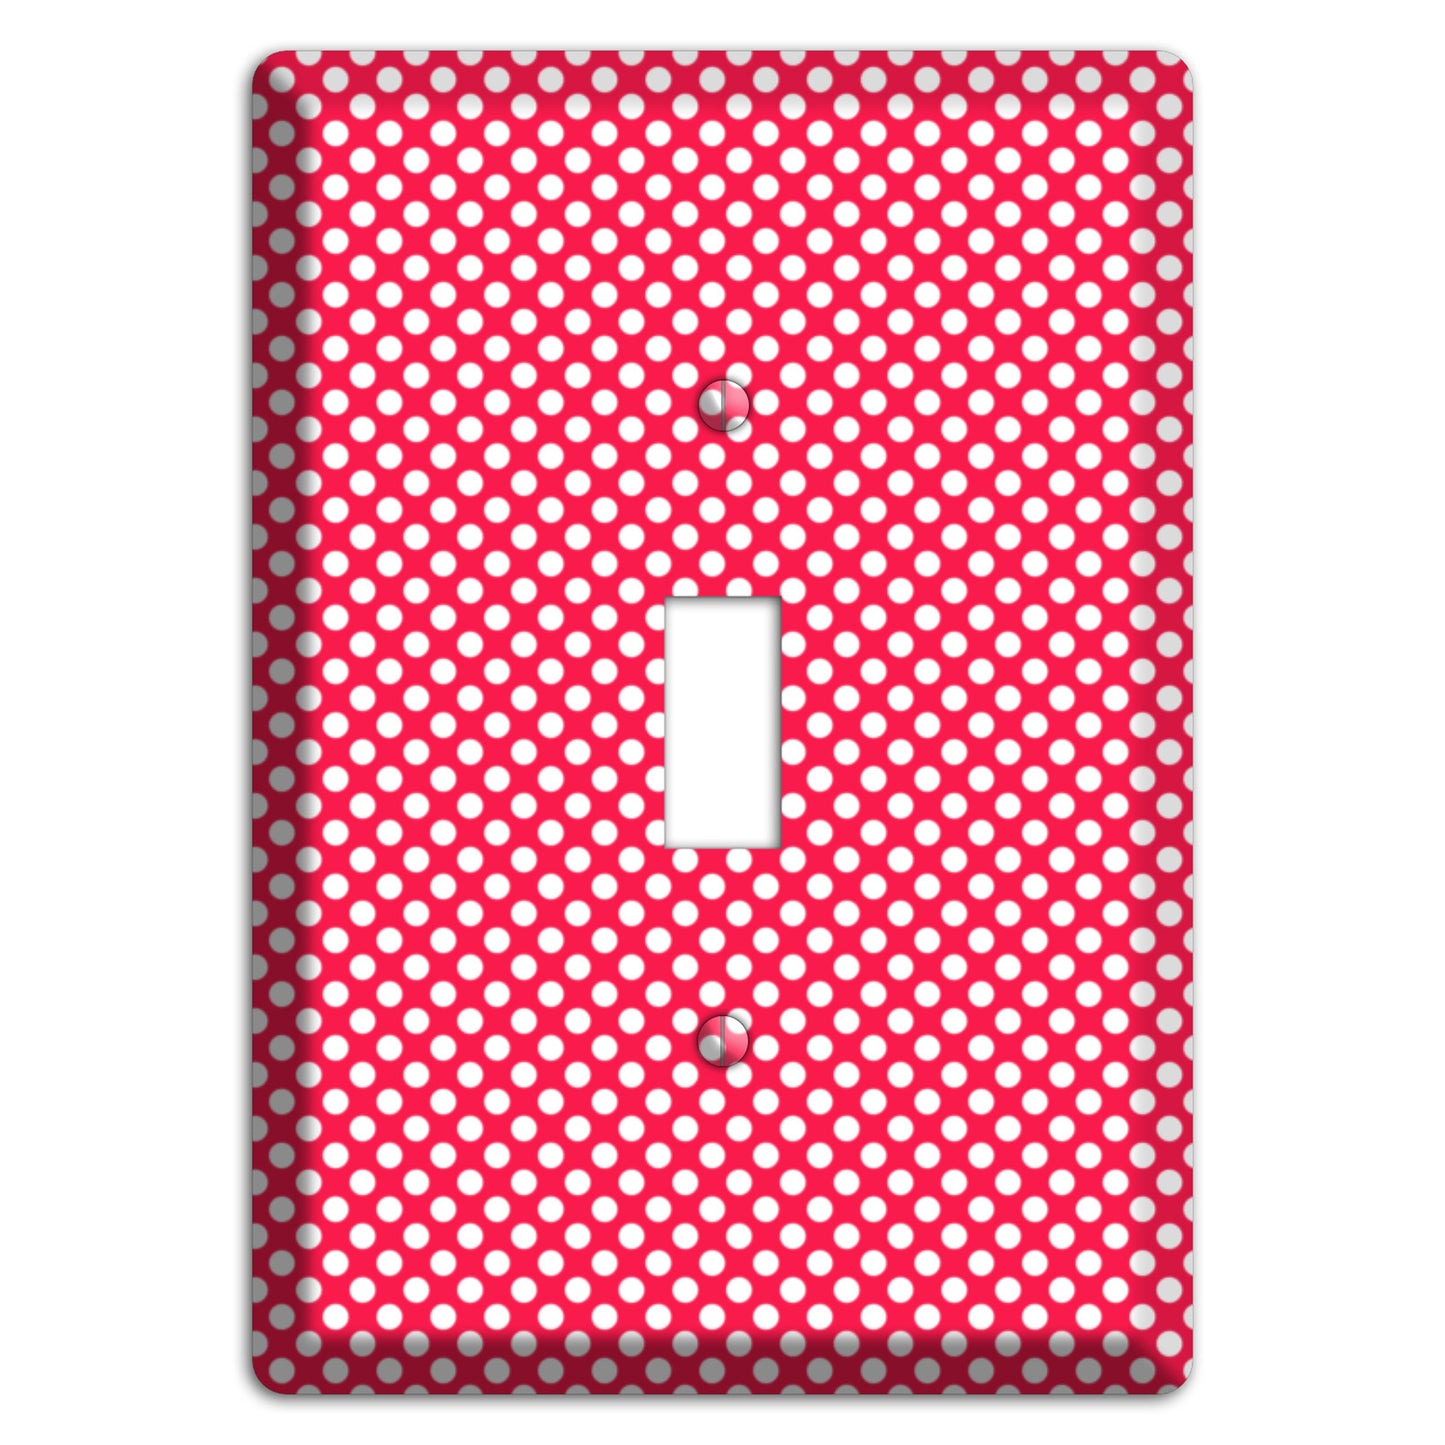 Fuschia with Pink Tiny Polka Dots Cover Plates